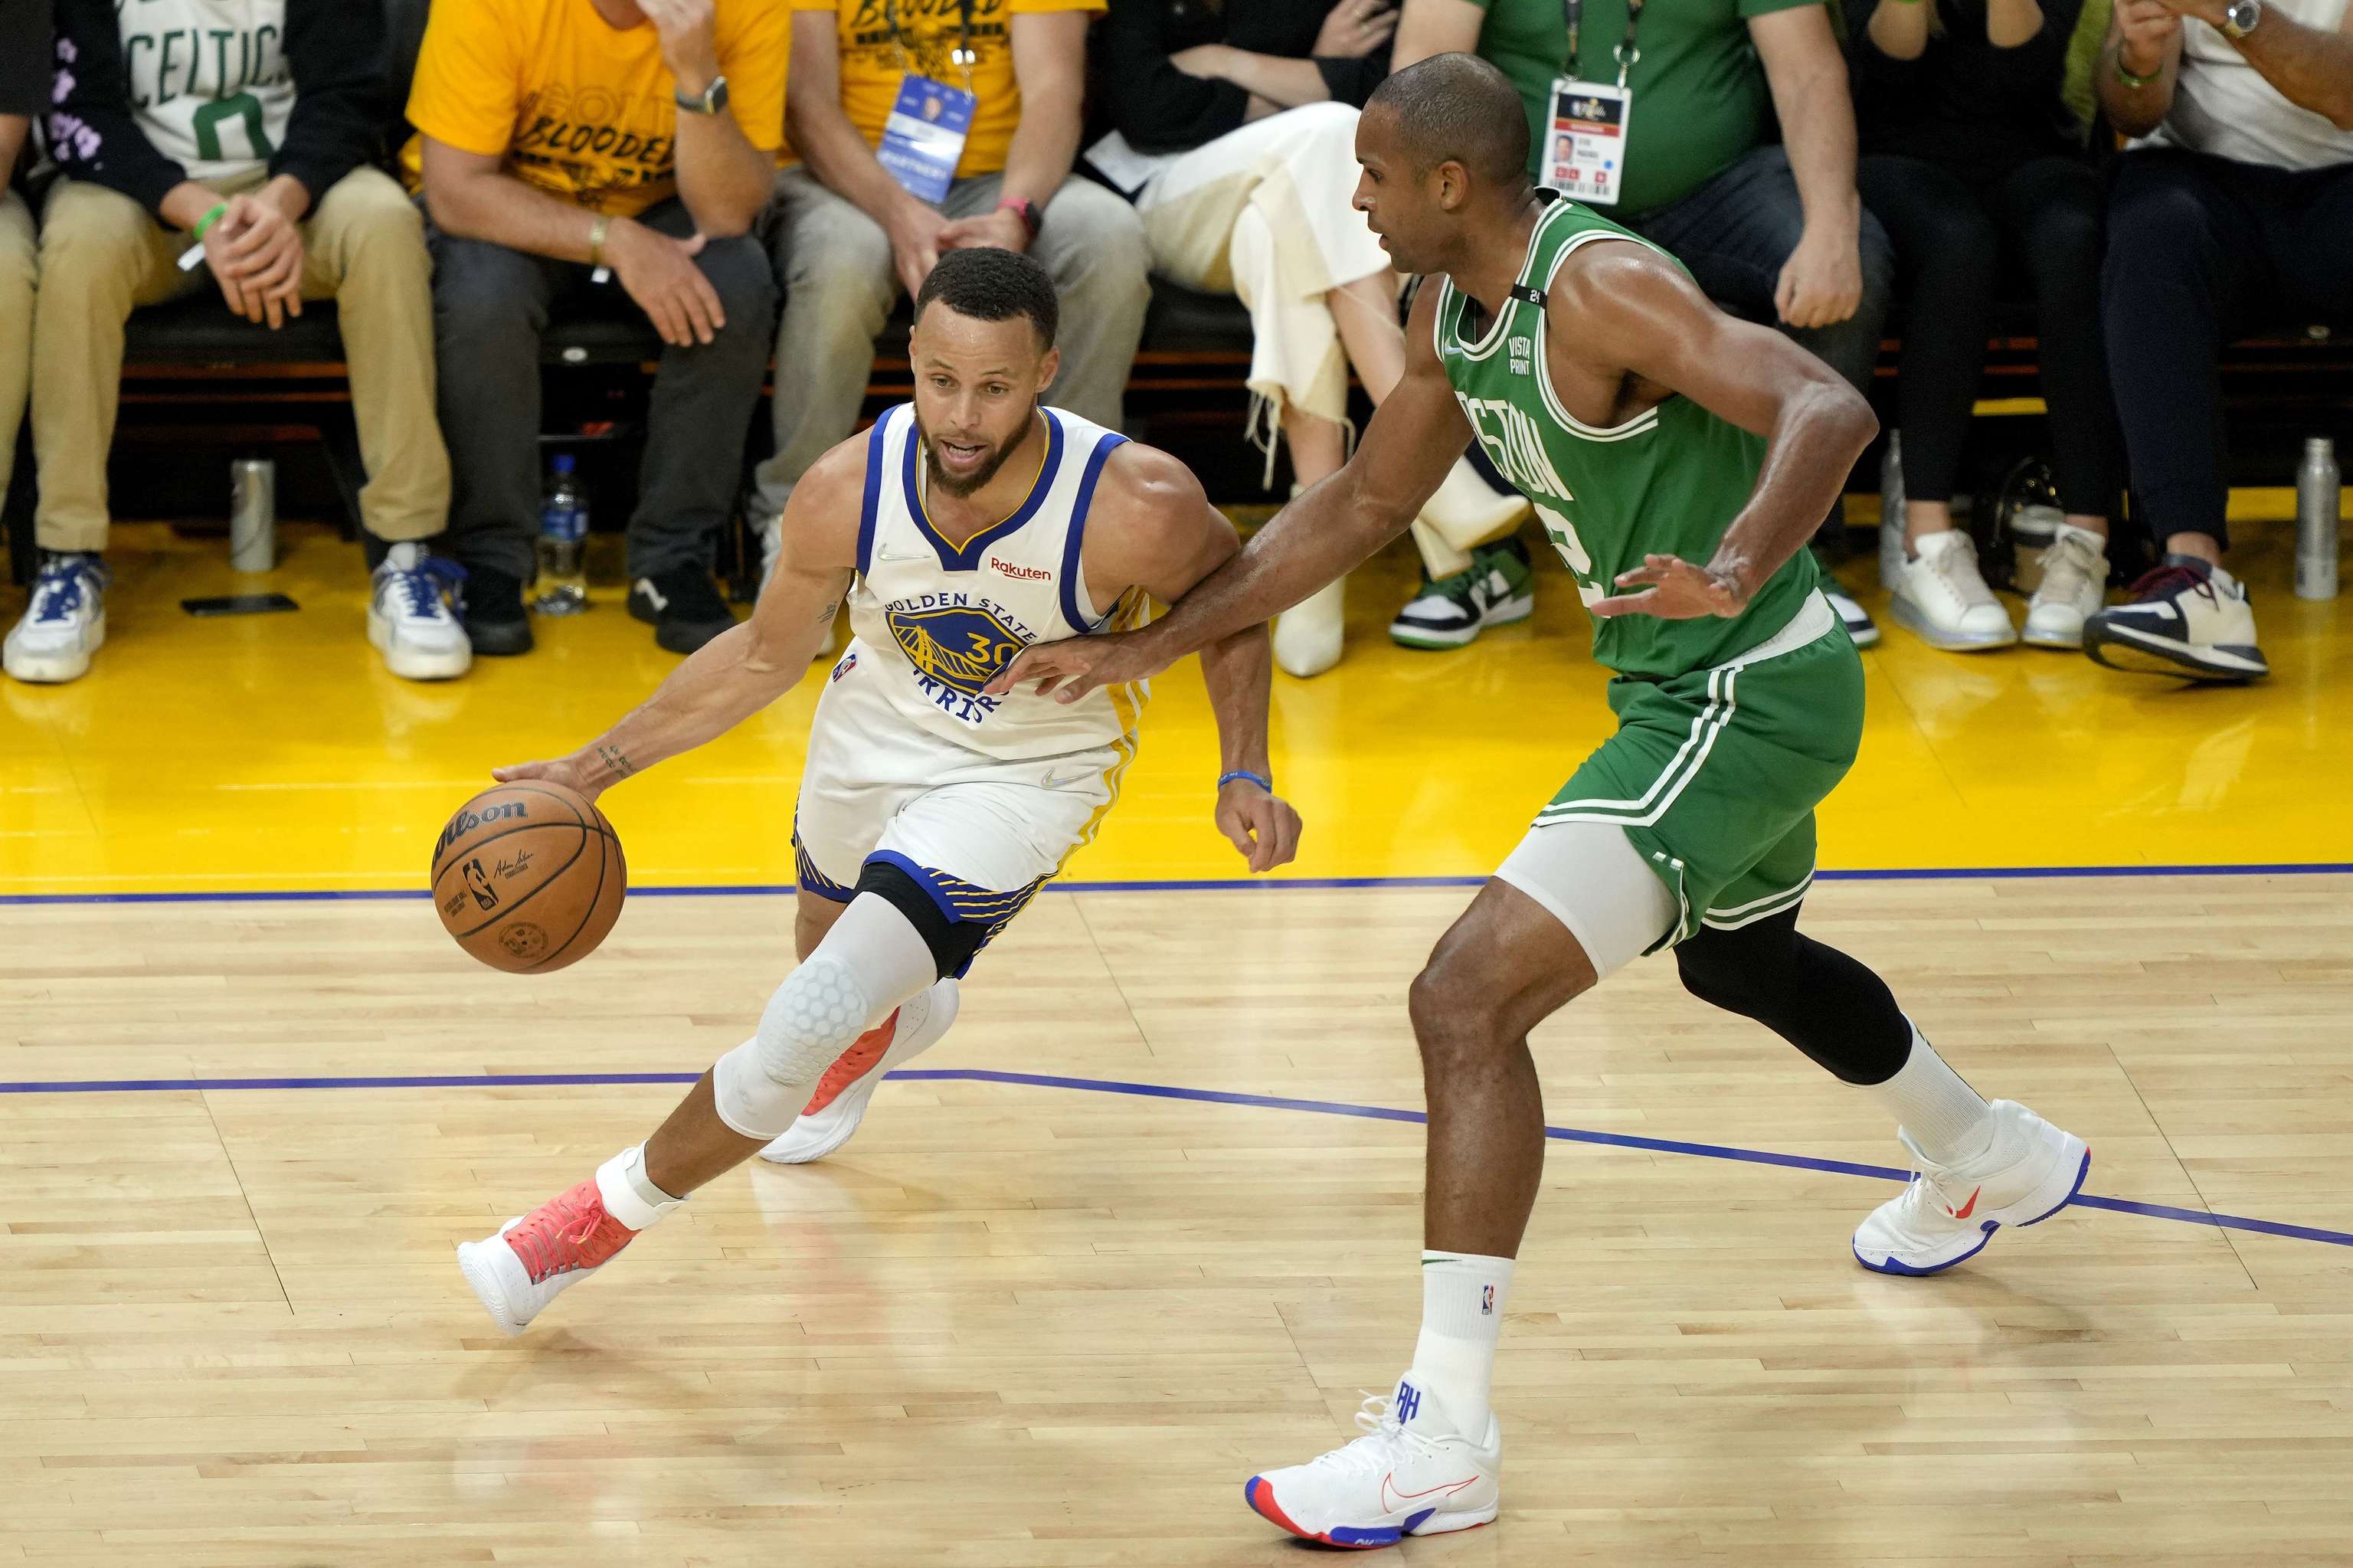 Stephen Curry in the second quarter game.